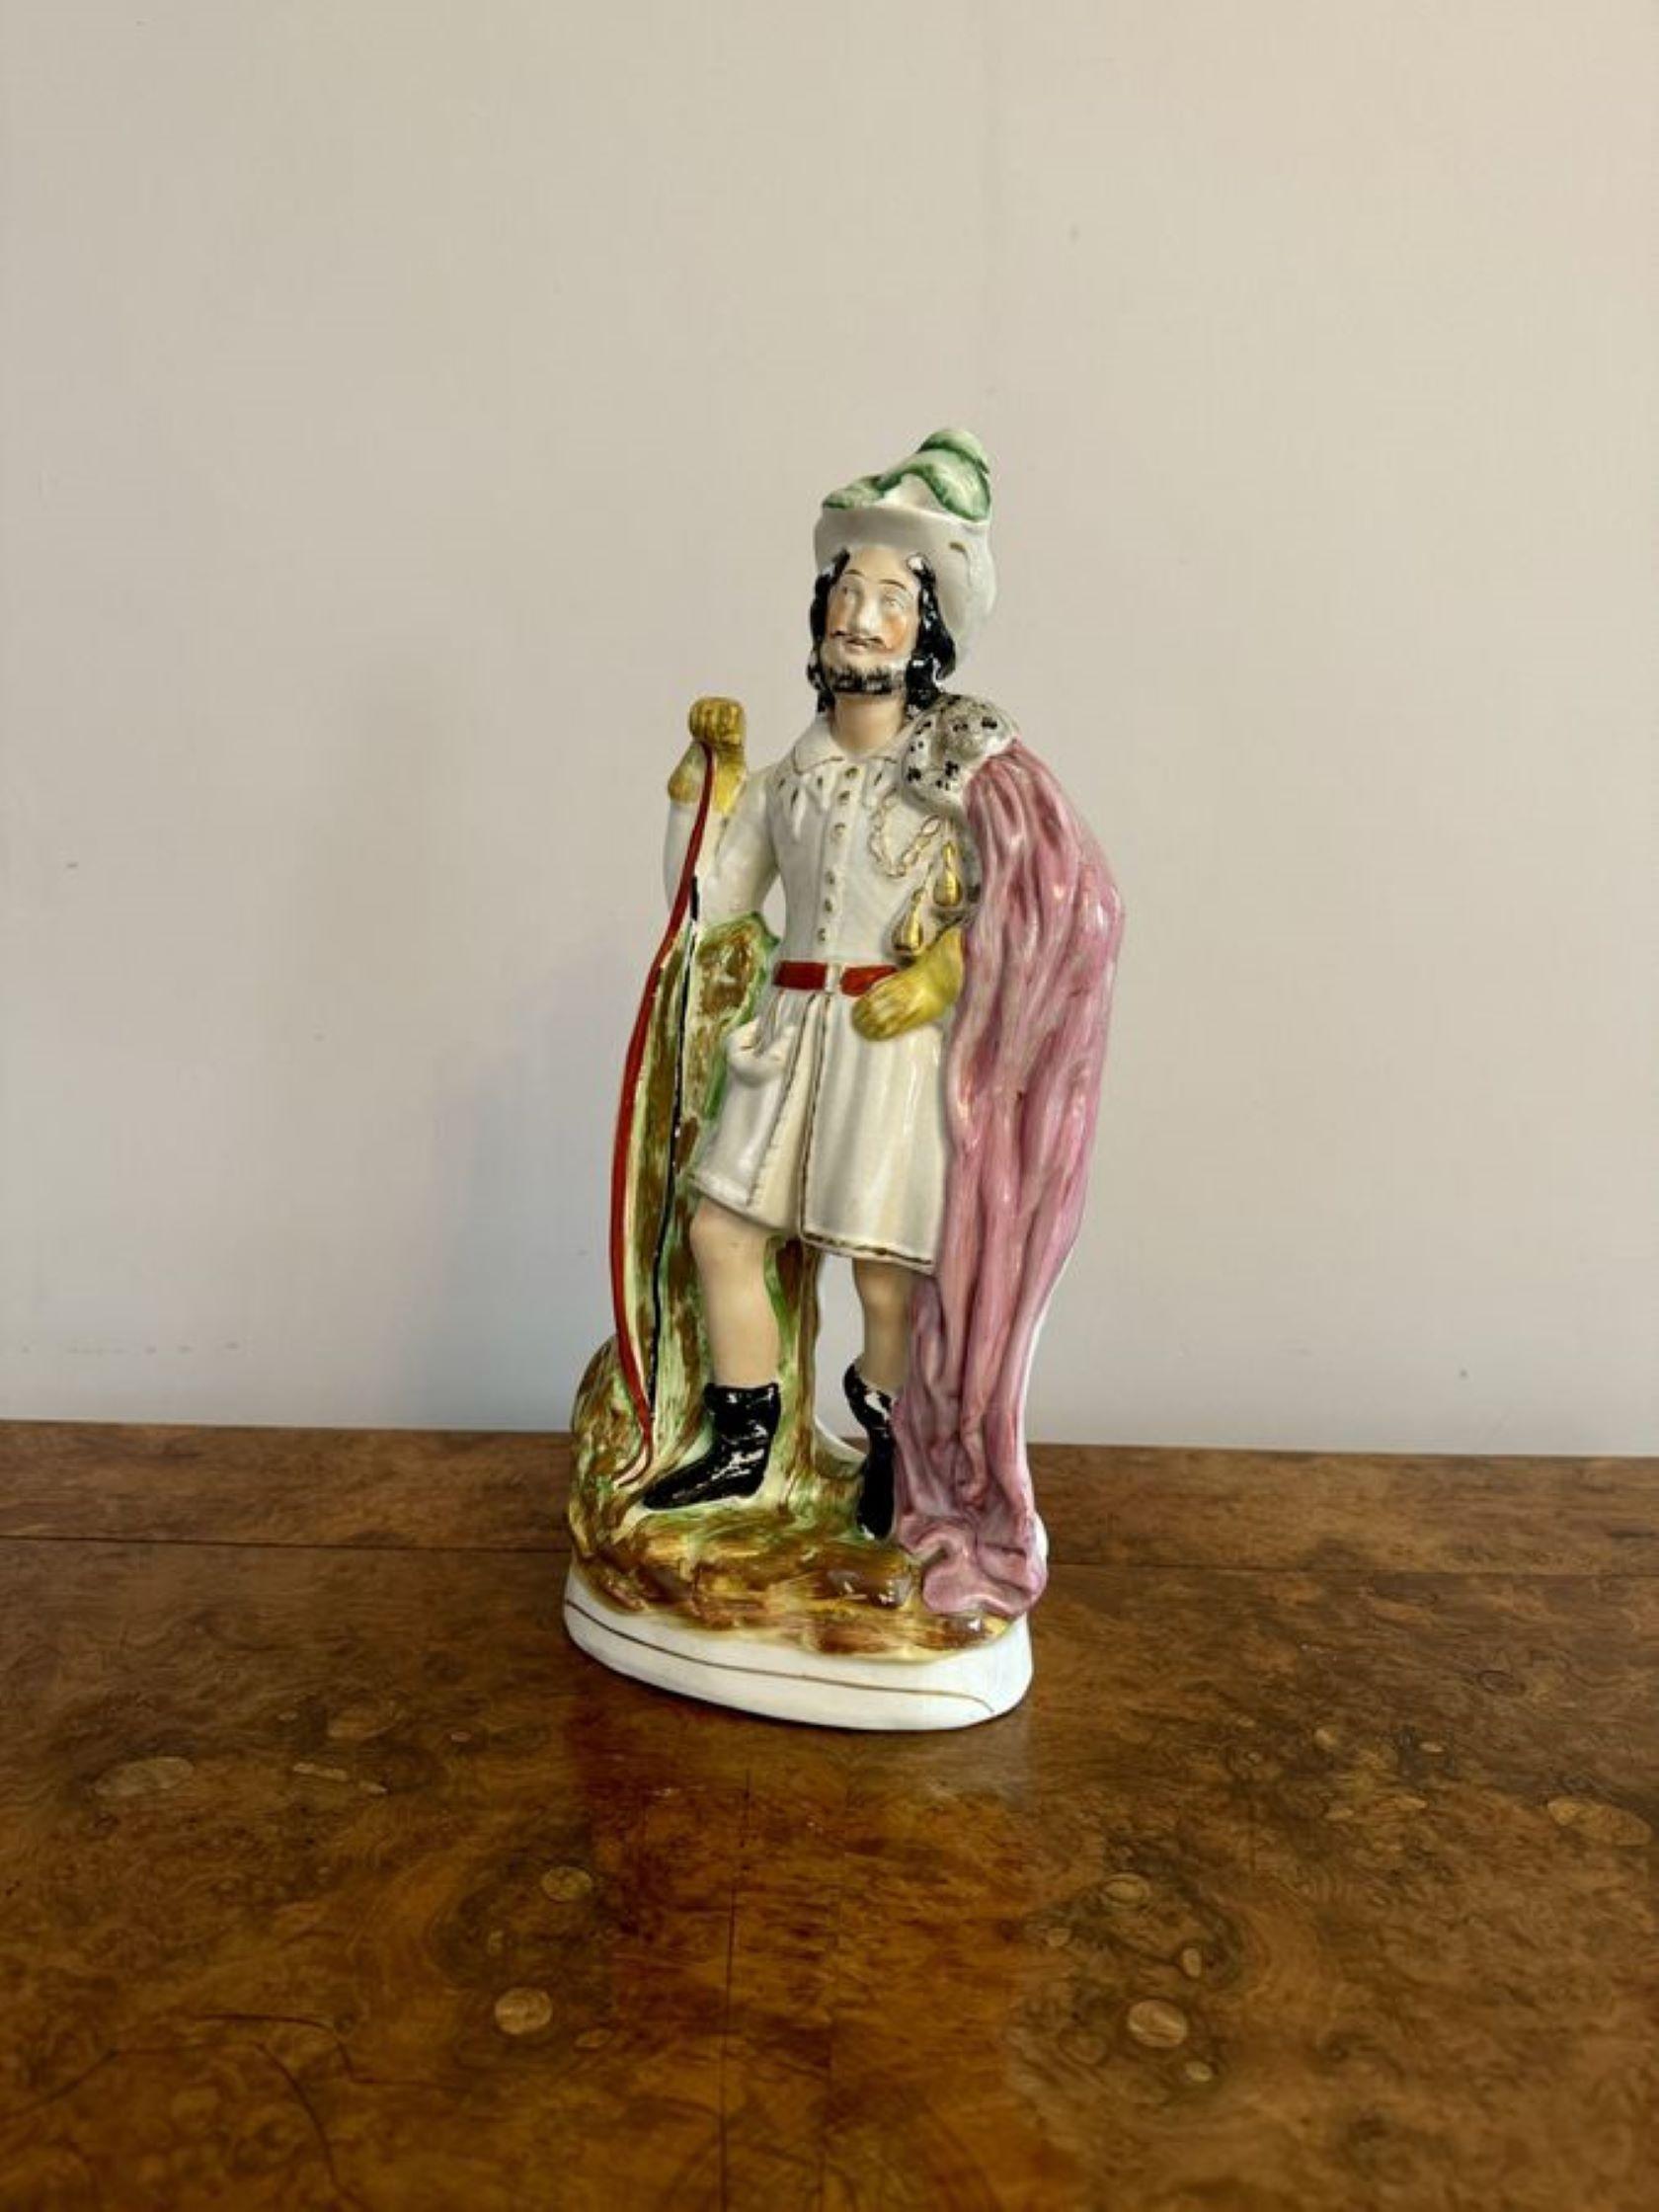 Large antique Victorian Robin Hood Staffordshire figure, having a quality large antique Staffordshire figure of Robin Hood standing with a bow to his side, hand painted in wonderful pink, green, clack, brown and gold colours raised on an oval gilded